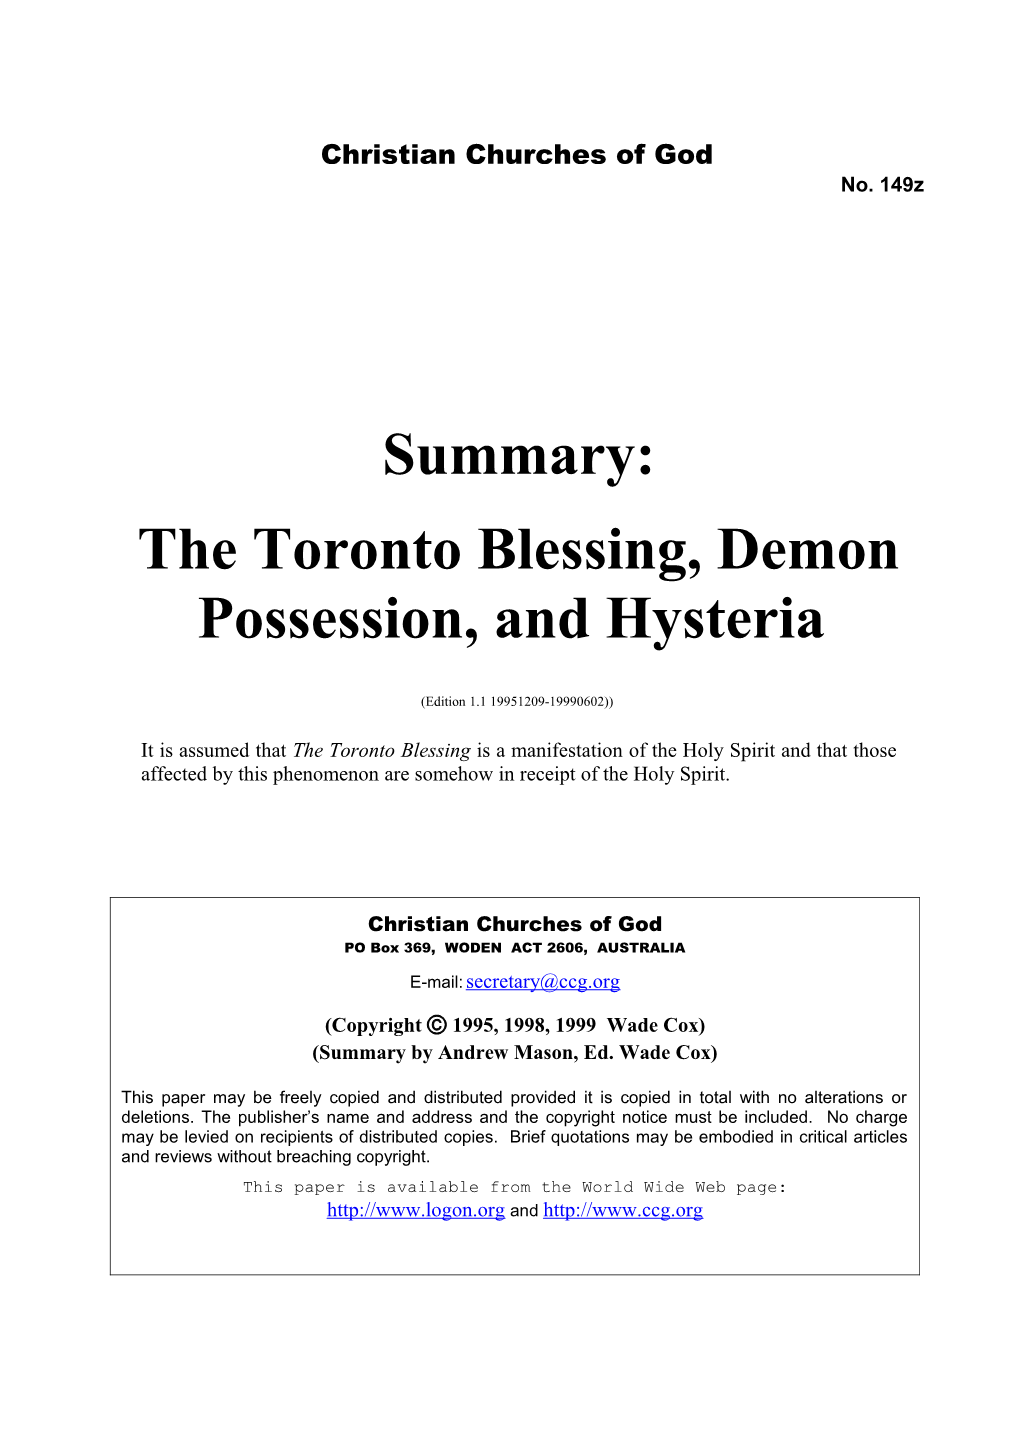 Summary: the Toronto Blessing, Demon Possession and Hysteria (No. 149Z)